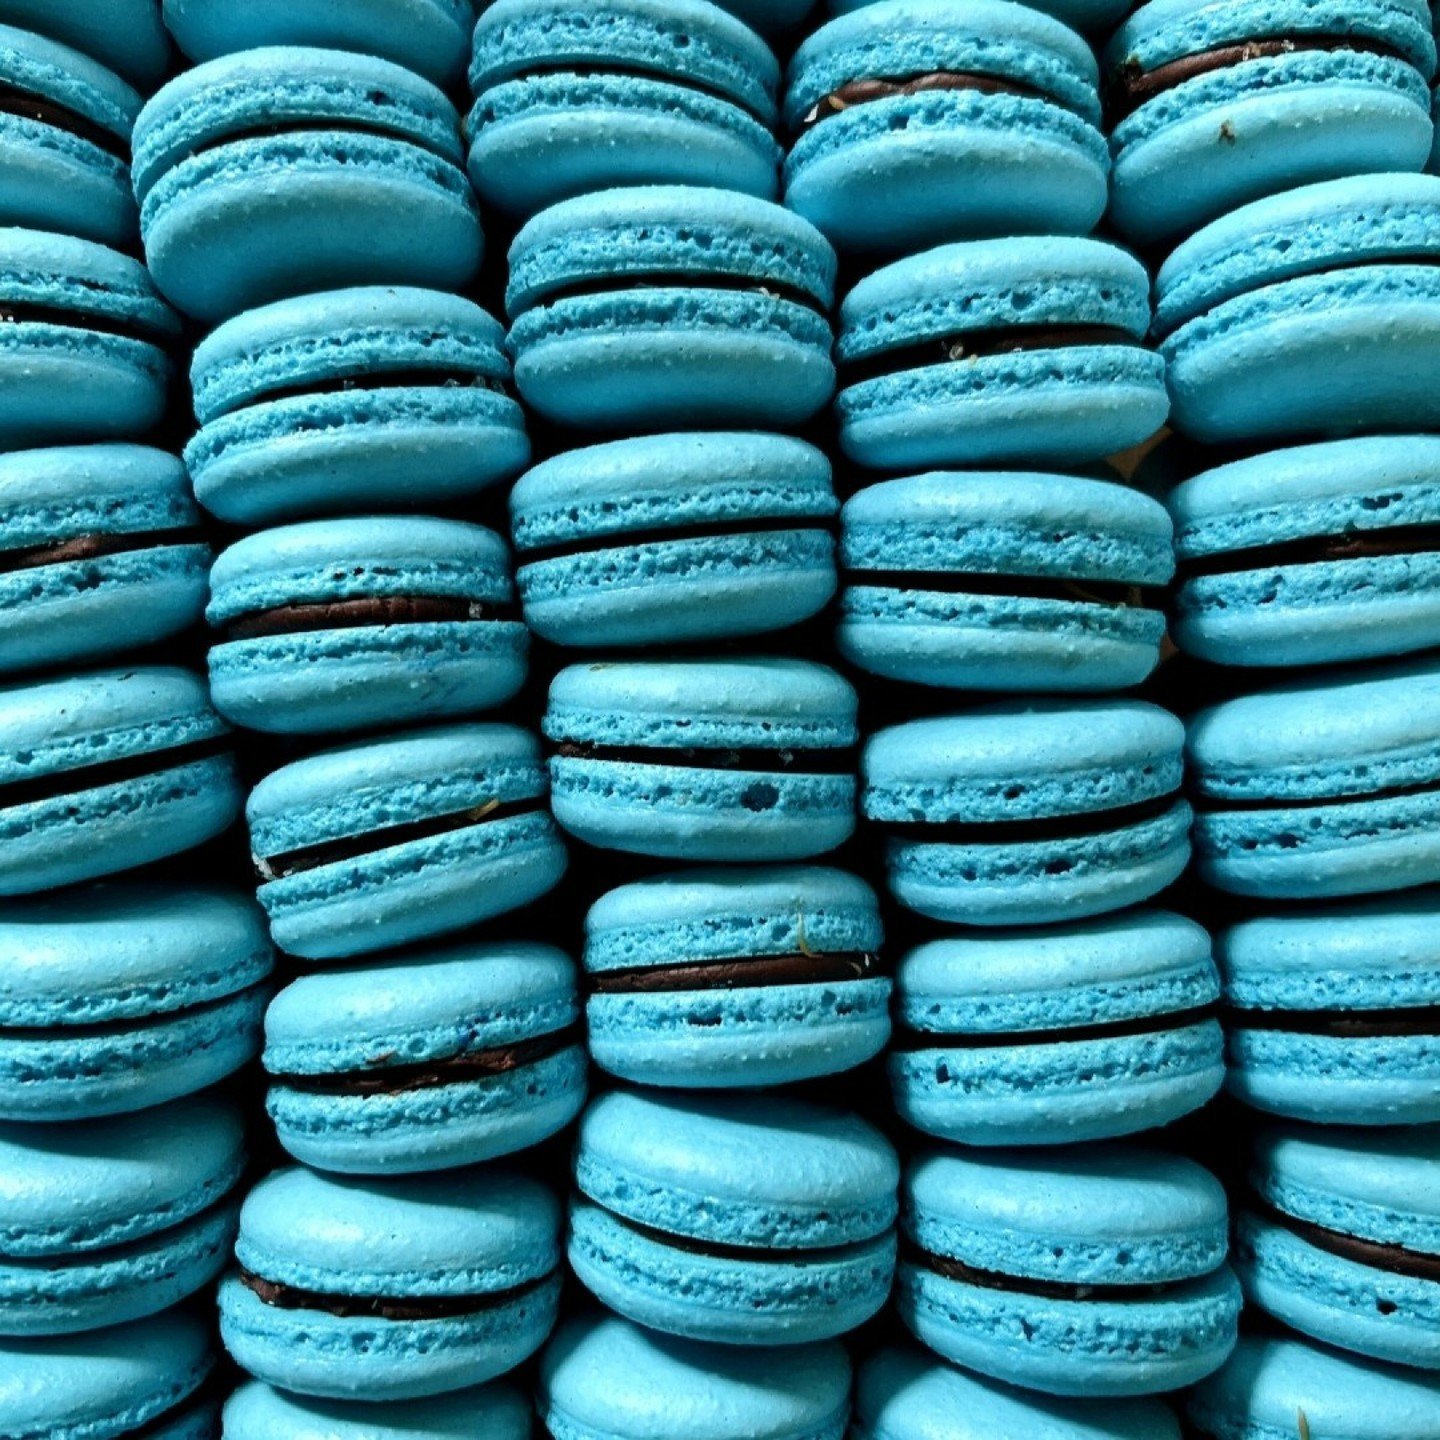 Salted Caramel Macarons... one of our favorites! 💙

*
*
*
*
*
#atyhospitality #siftmystic #siftniantic #siftwatchill #siftbakeshop #mysticct #downtownmystic #ct #pastrychef